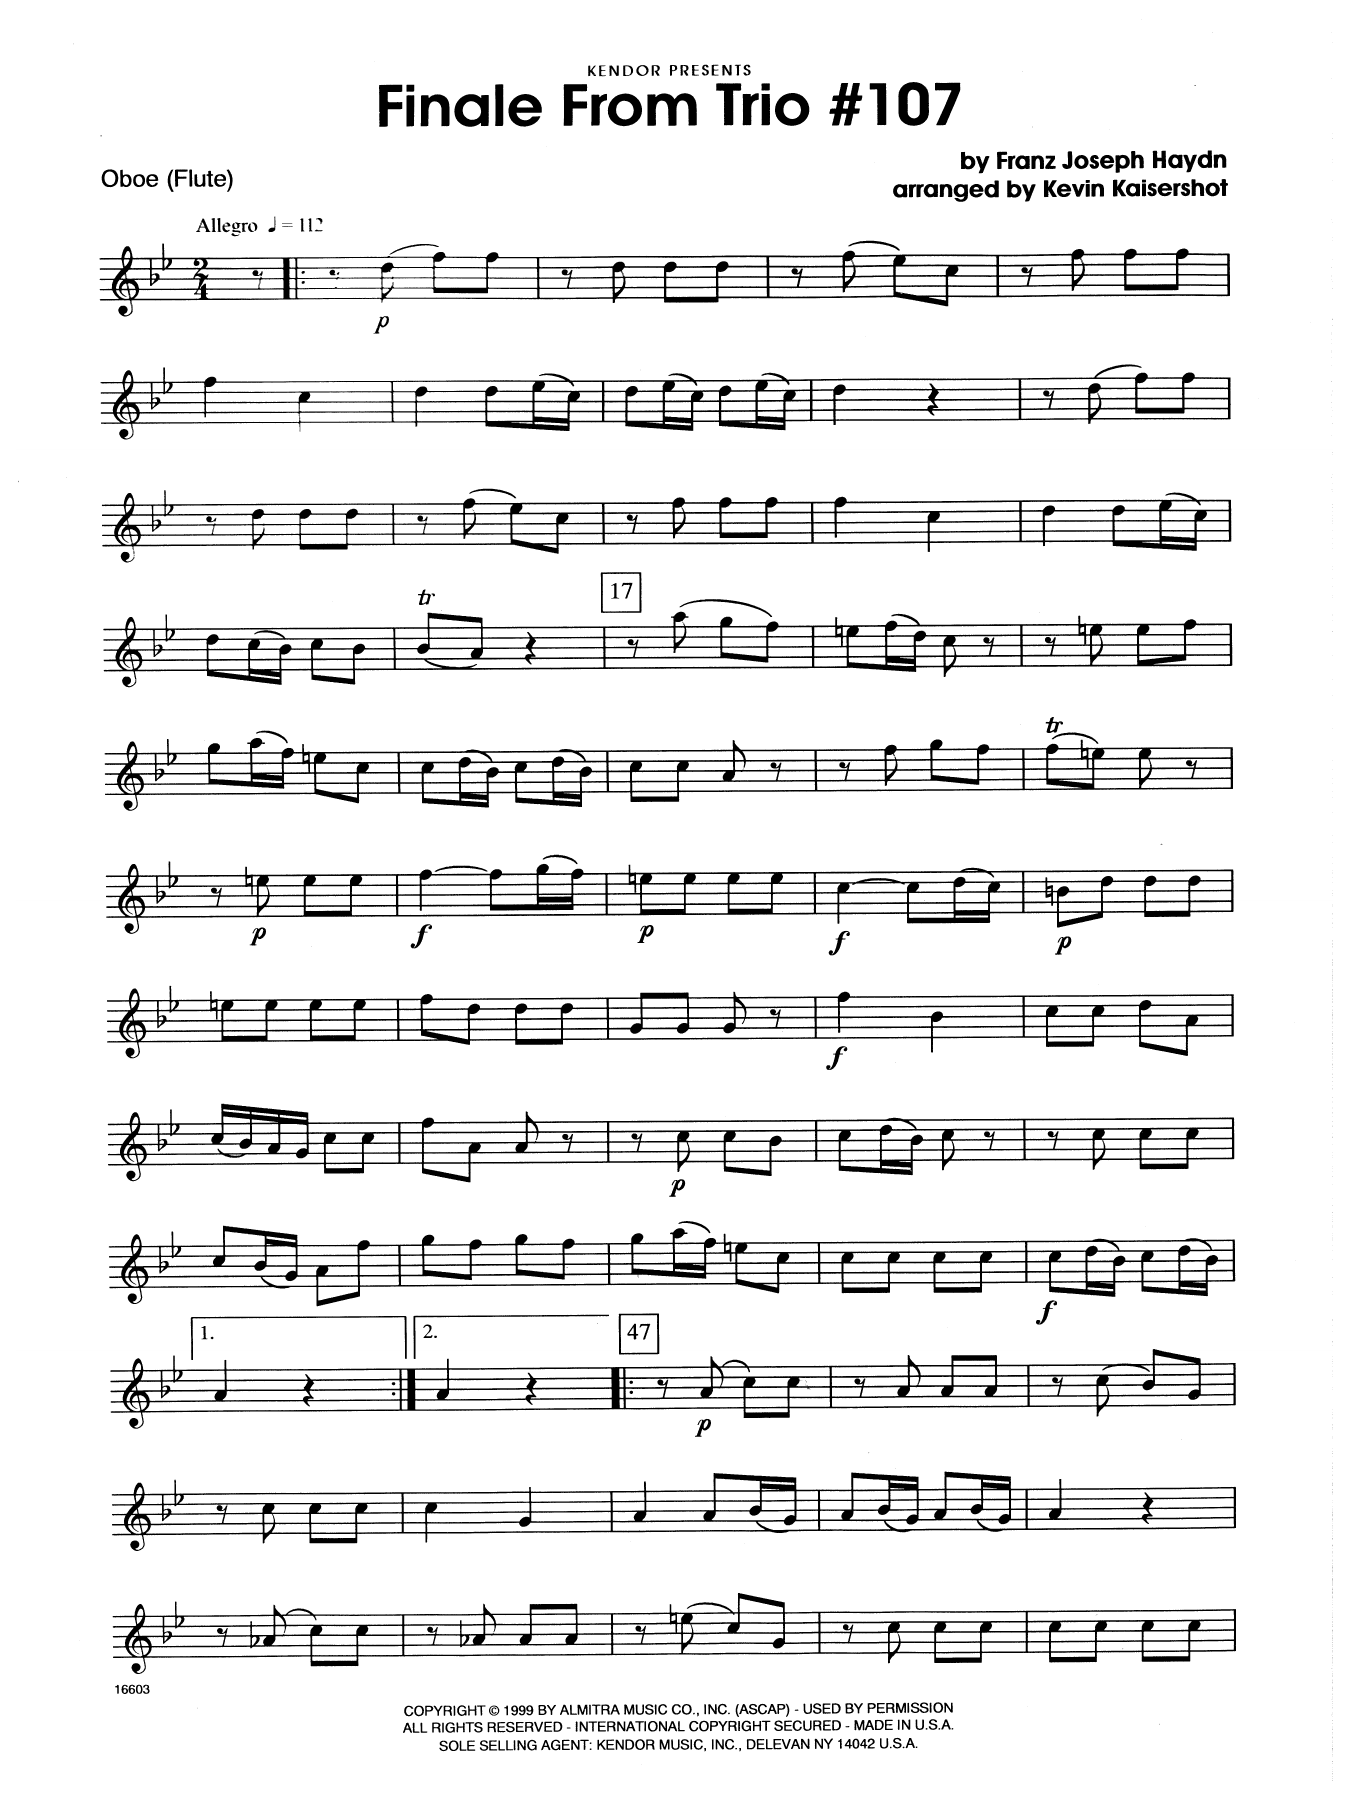 Kevin Kaisershot Finale From Trio #107 - Oboe sheet music notes and chords. Download Printable PDF.